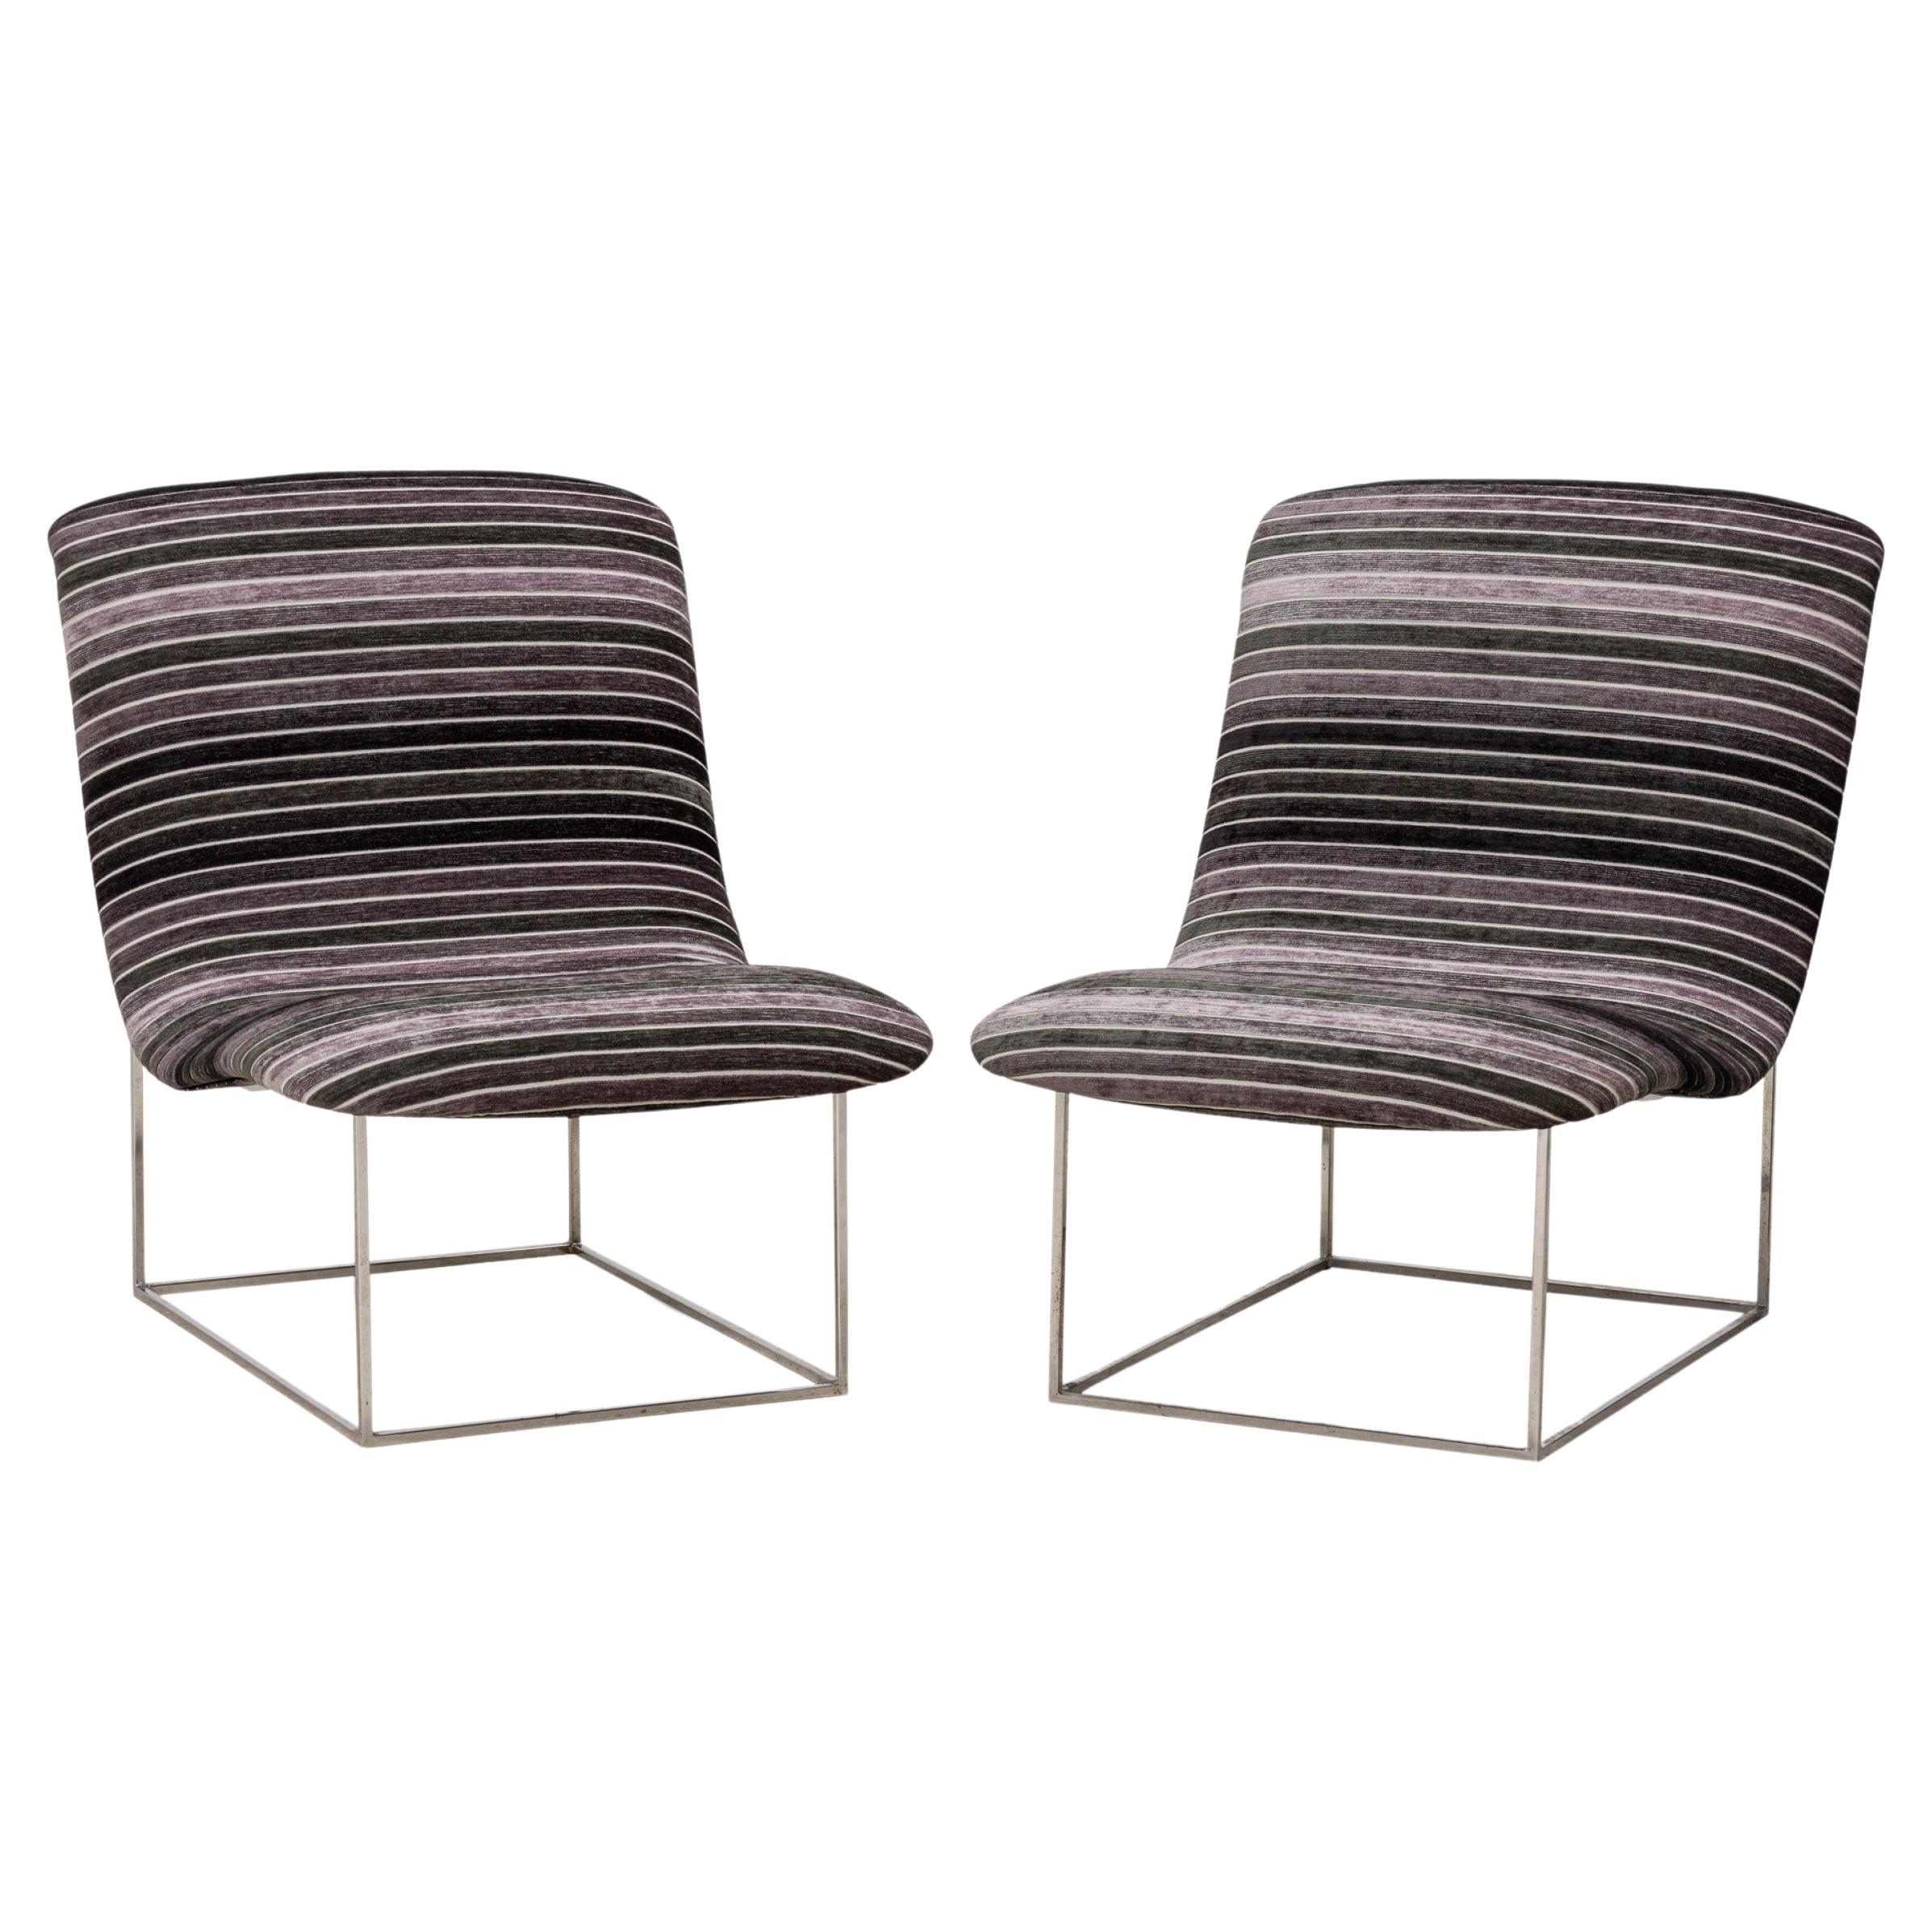 Pair of Milo Baughman Chrome and Black / Gray Striped Upholstery Slipper Chairs For Sale